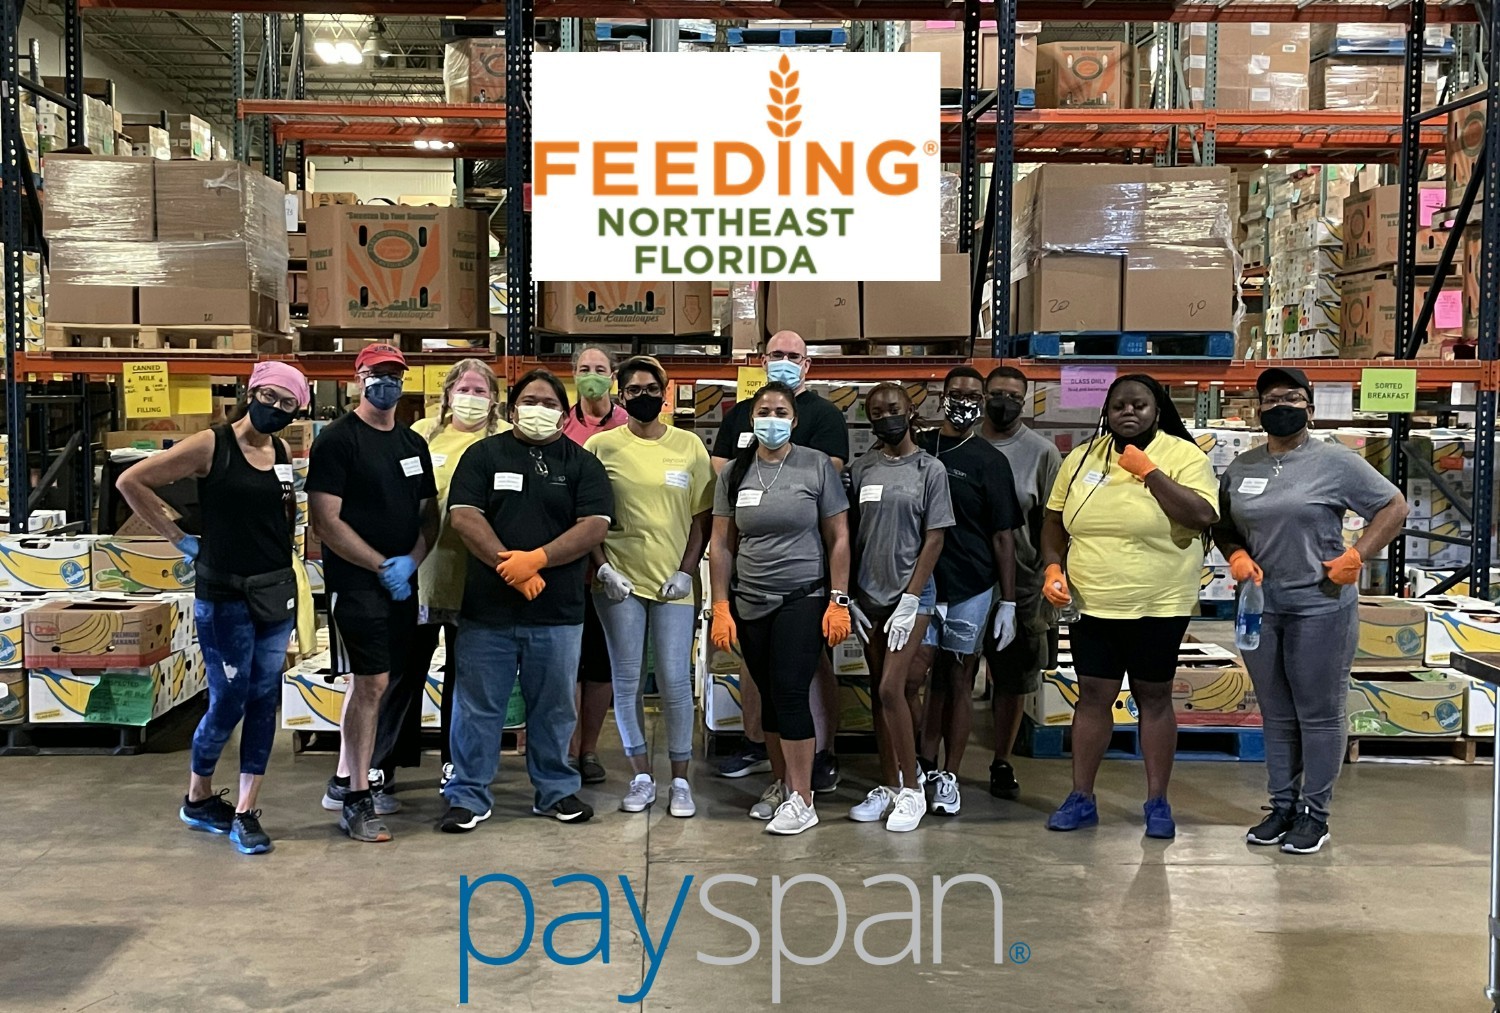 Q4 2021 Feeding Northeast Florida Community Engagement Event for Payspan Employees